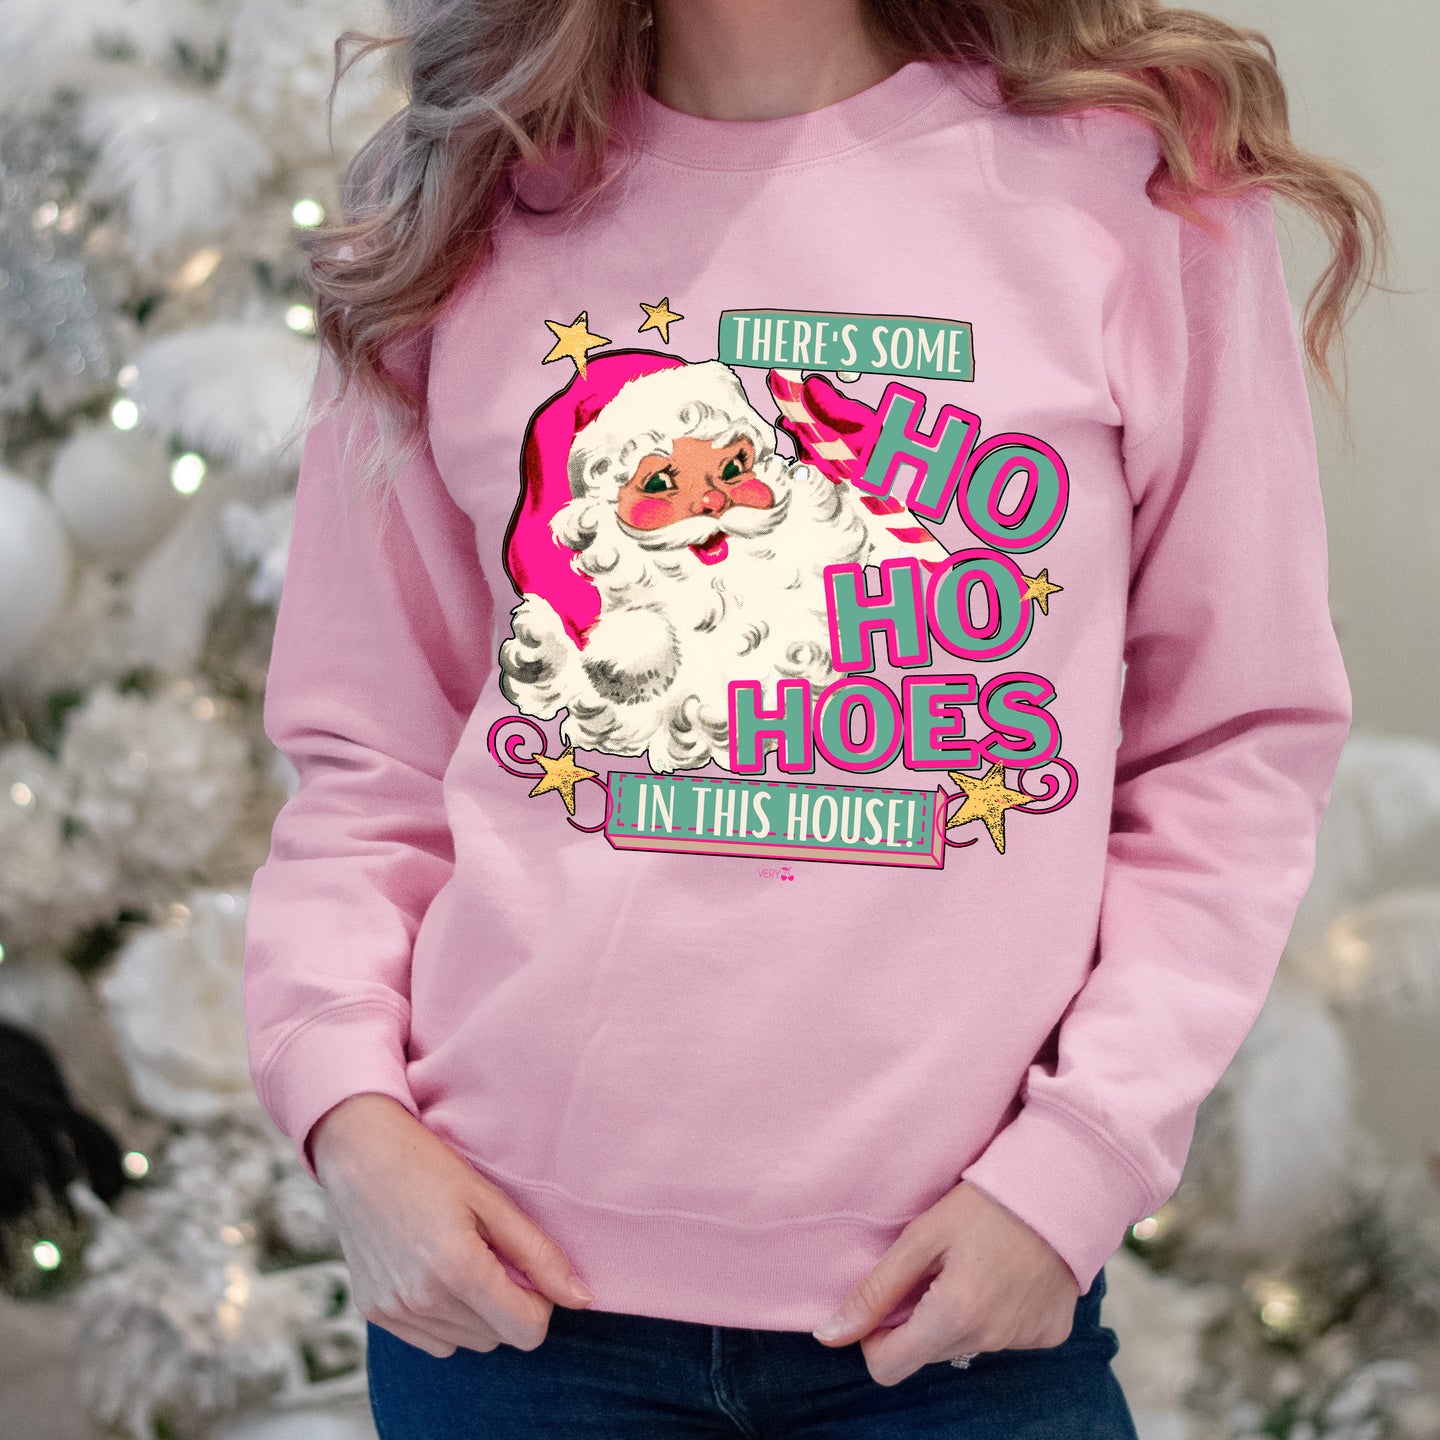 Hoes in this House Graphic Sweatshirt